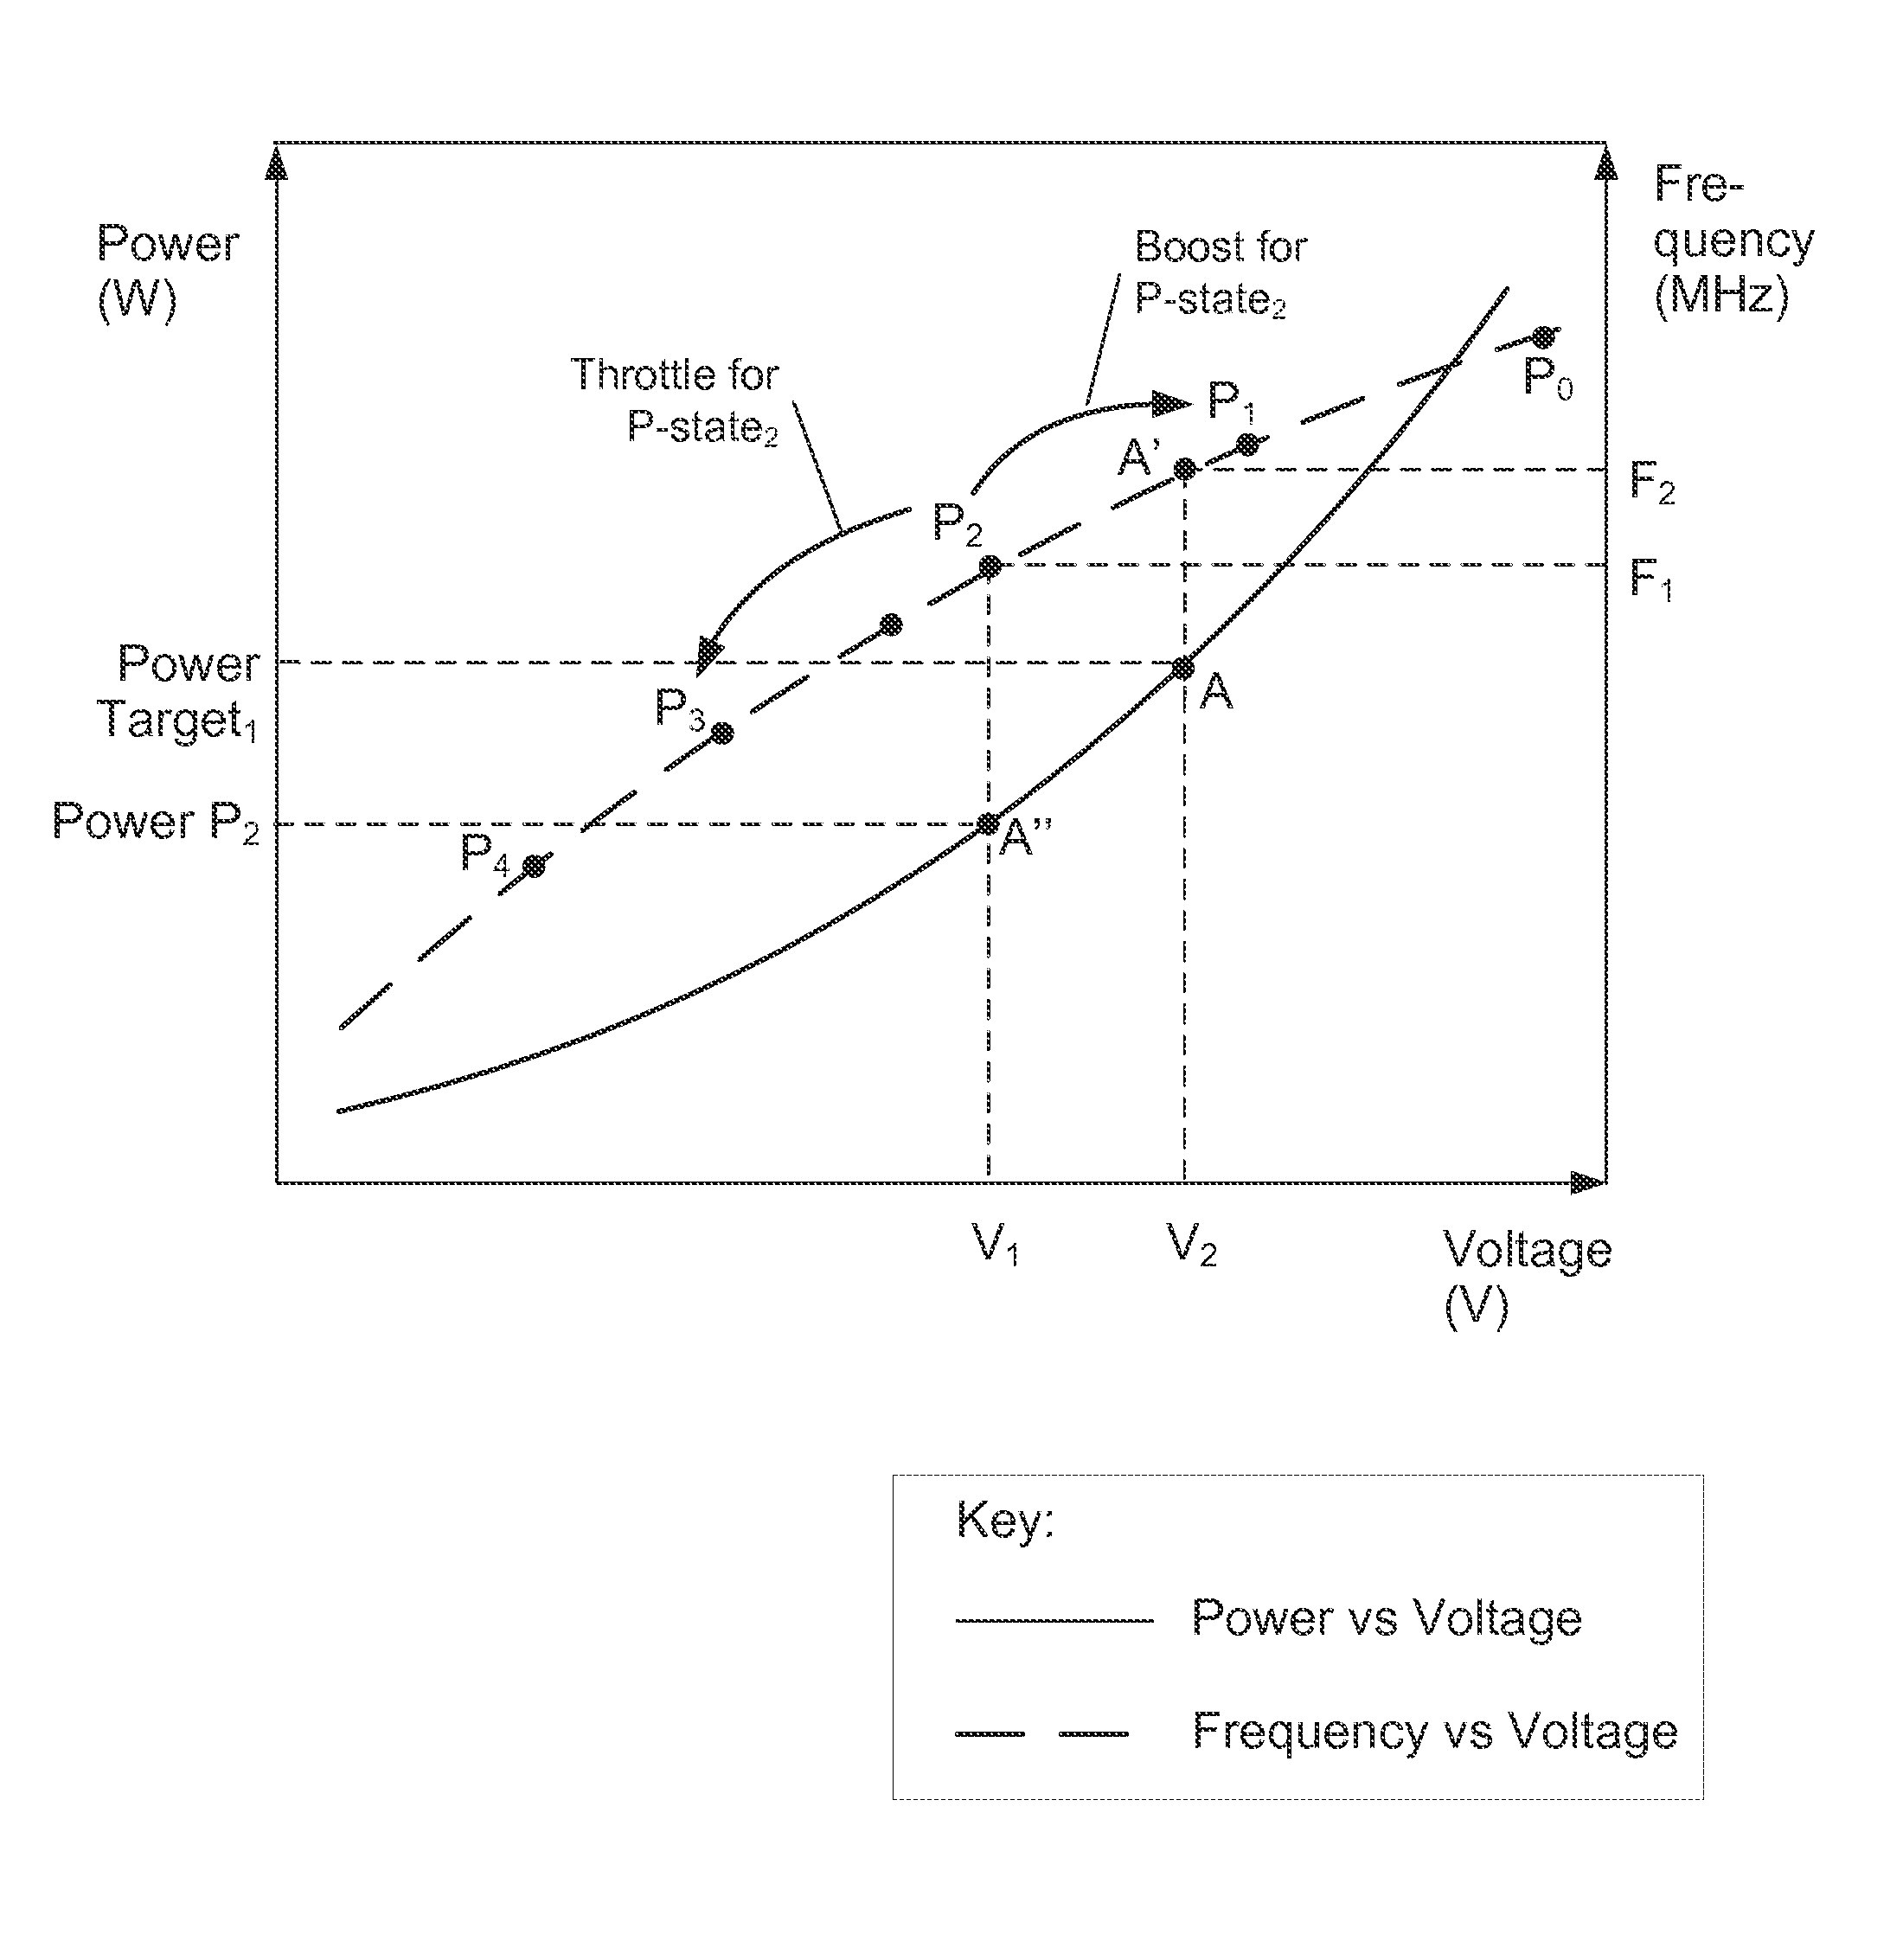 System and method for adjusting performance based on thermal conditions within a processor